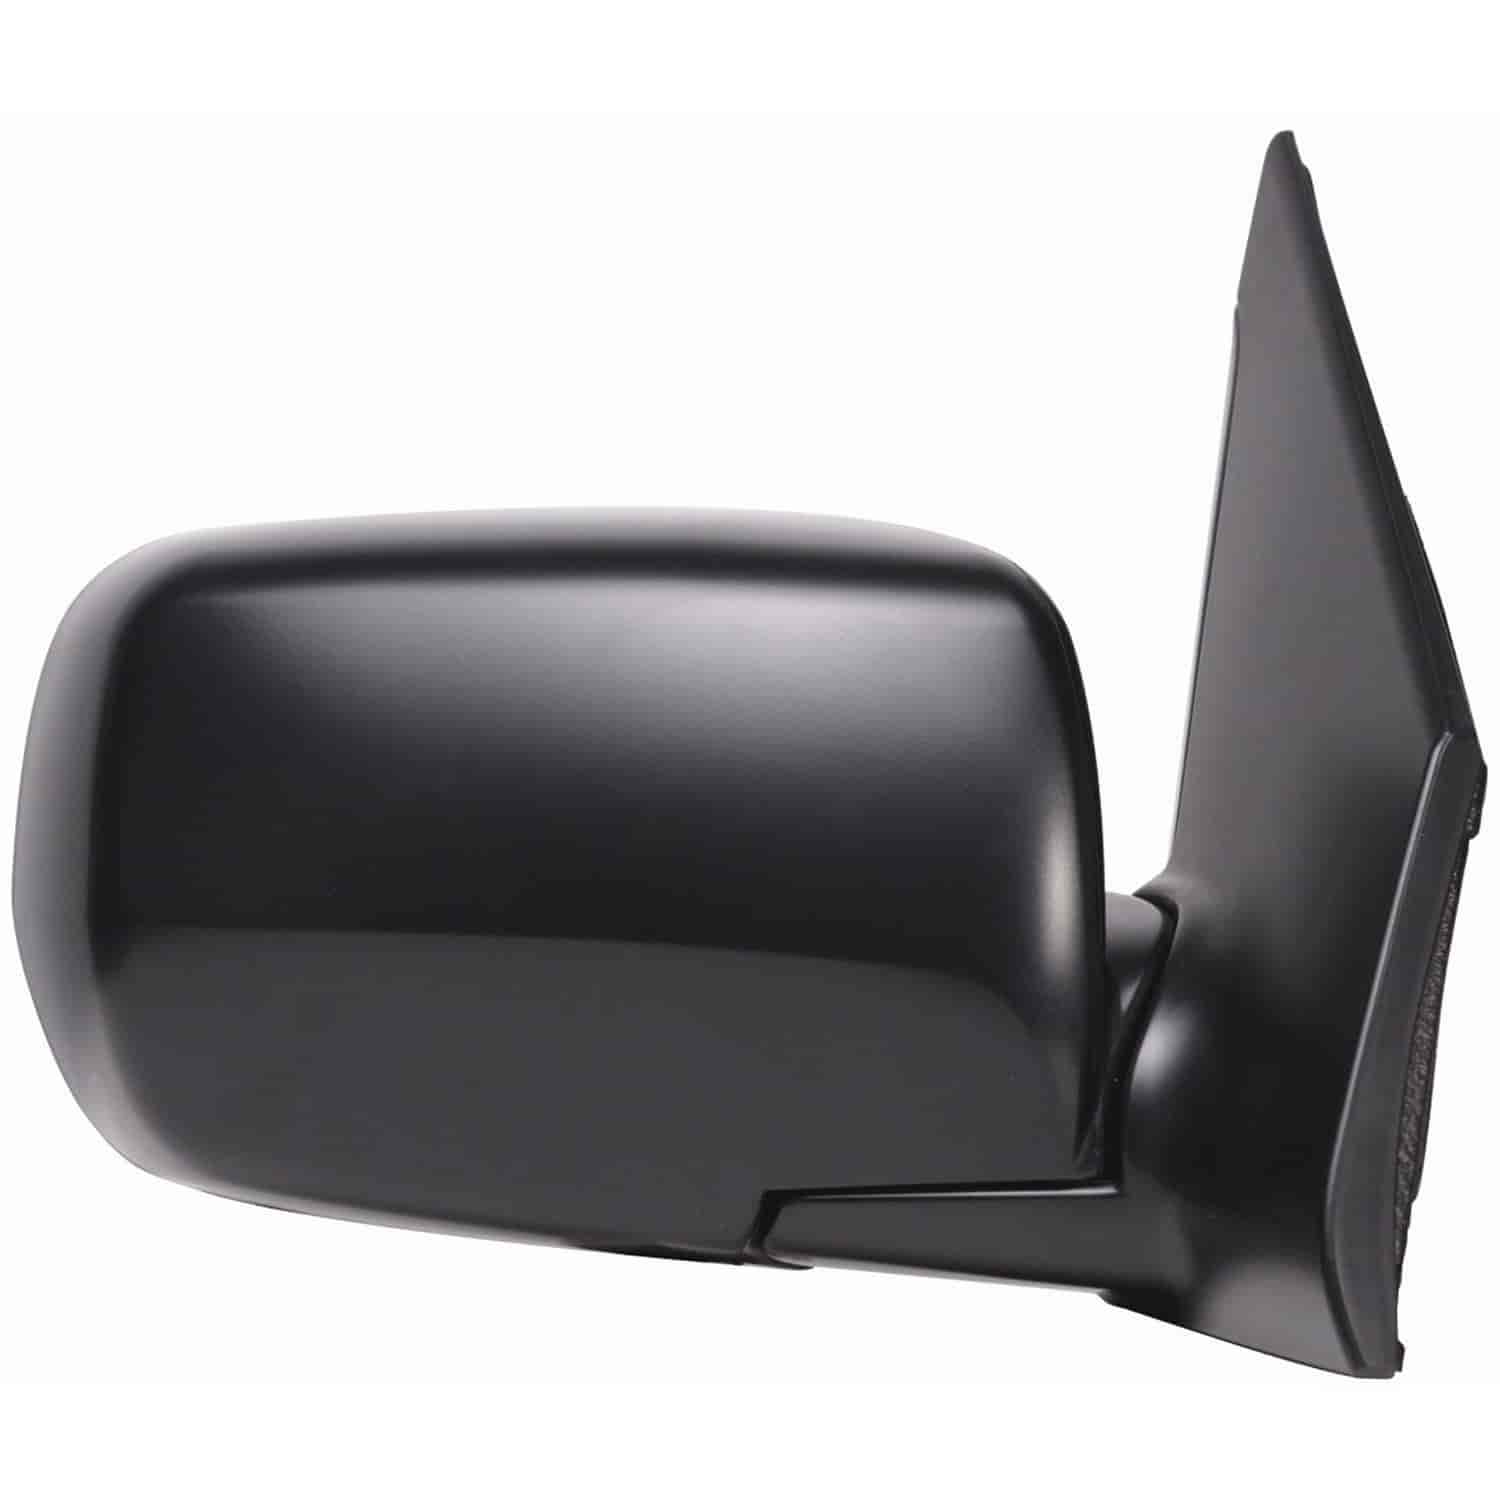 OEM Style Replacement mirror for 03-08 Honda Pilot passenger side mirror tested to fit and function